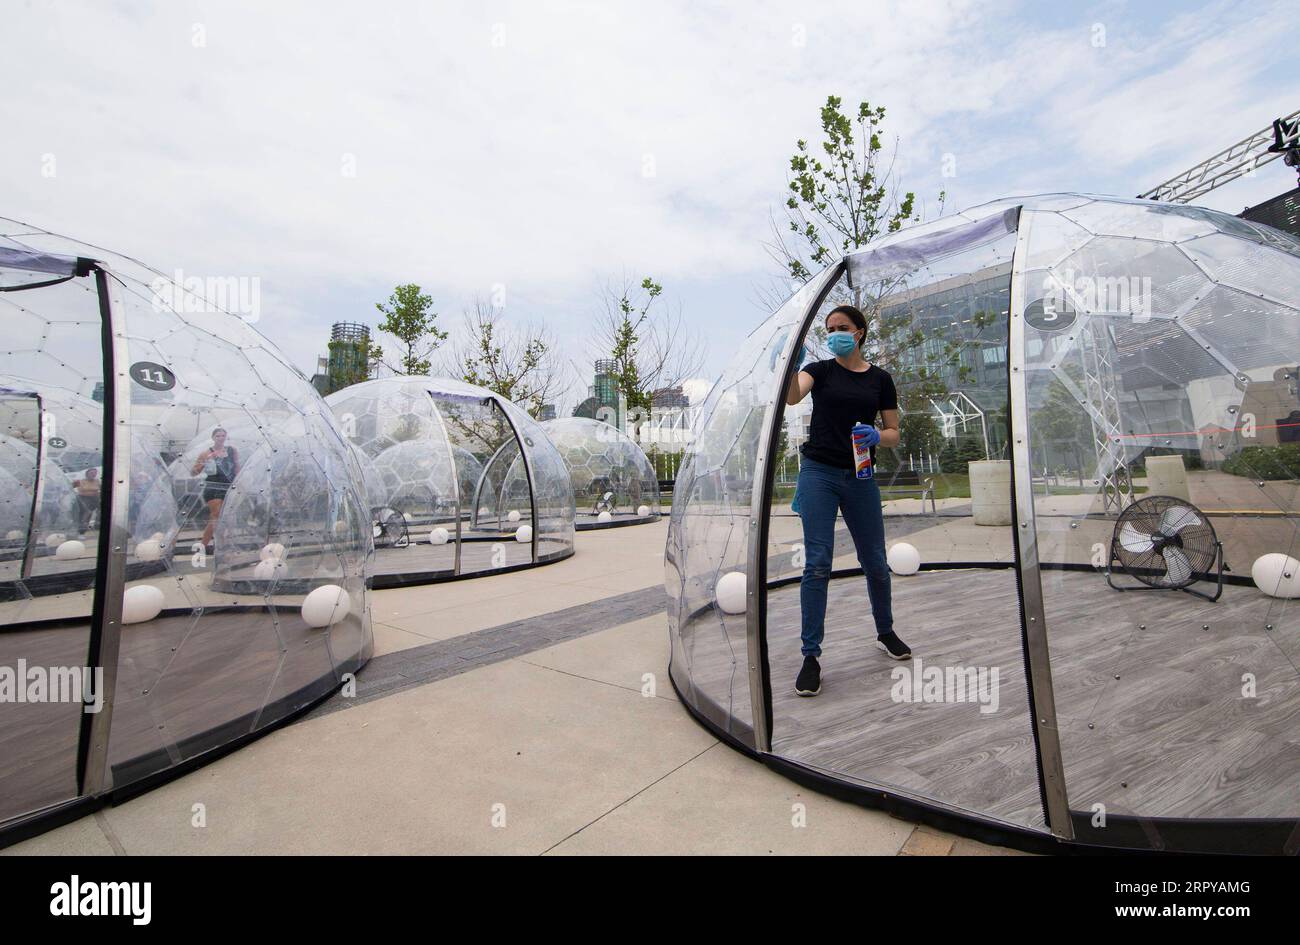 https://c8.alamy.com/comp/2RPYAMG/200623-toronto-june-23-2020-a-staff-member-r-cleans-a-yoga-dome-after-use-in-toronto-canada-on-june-22-2020-a-new-pop-up-event-called-hot-yoga-has-been-held-in-toronto-from-june-21-to-july-31-people-can-take-part-in-yoga-classes-inside-their-own-private-dome-to-prevent-the-spread-of-covid-19-photo-by-xinhua-canada-toronto-covid-19-yoga-domes-zouxzheng-publicationxnotxinxchn-2RPYAMG.jpg